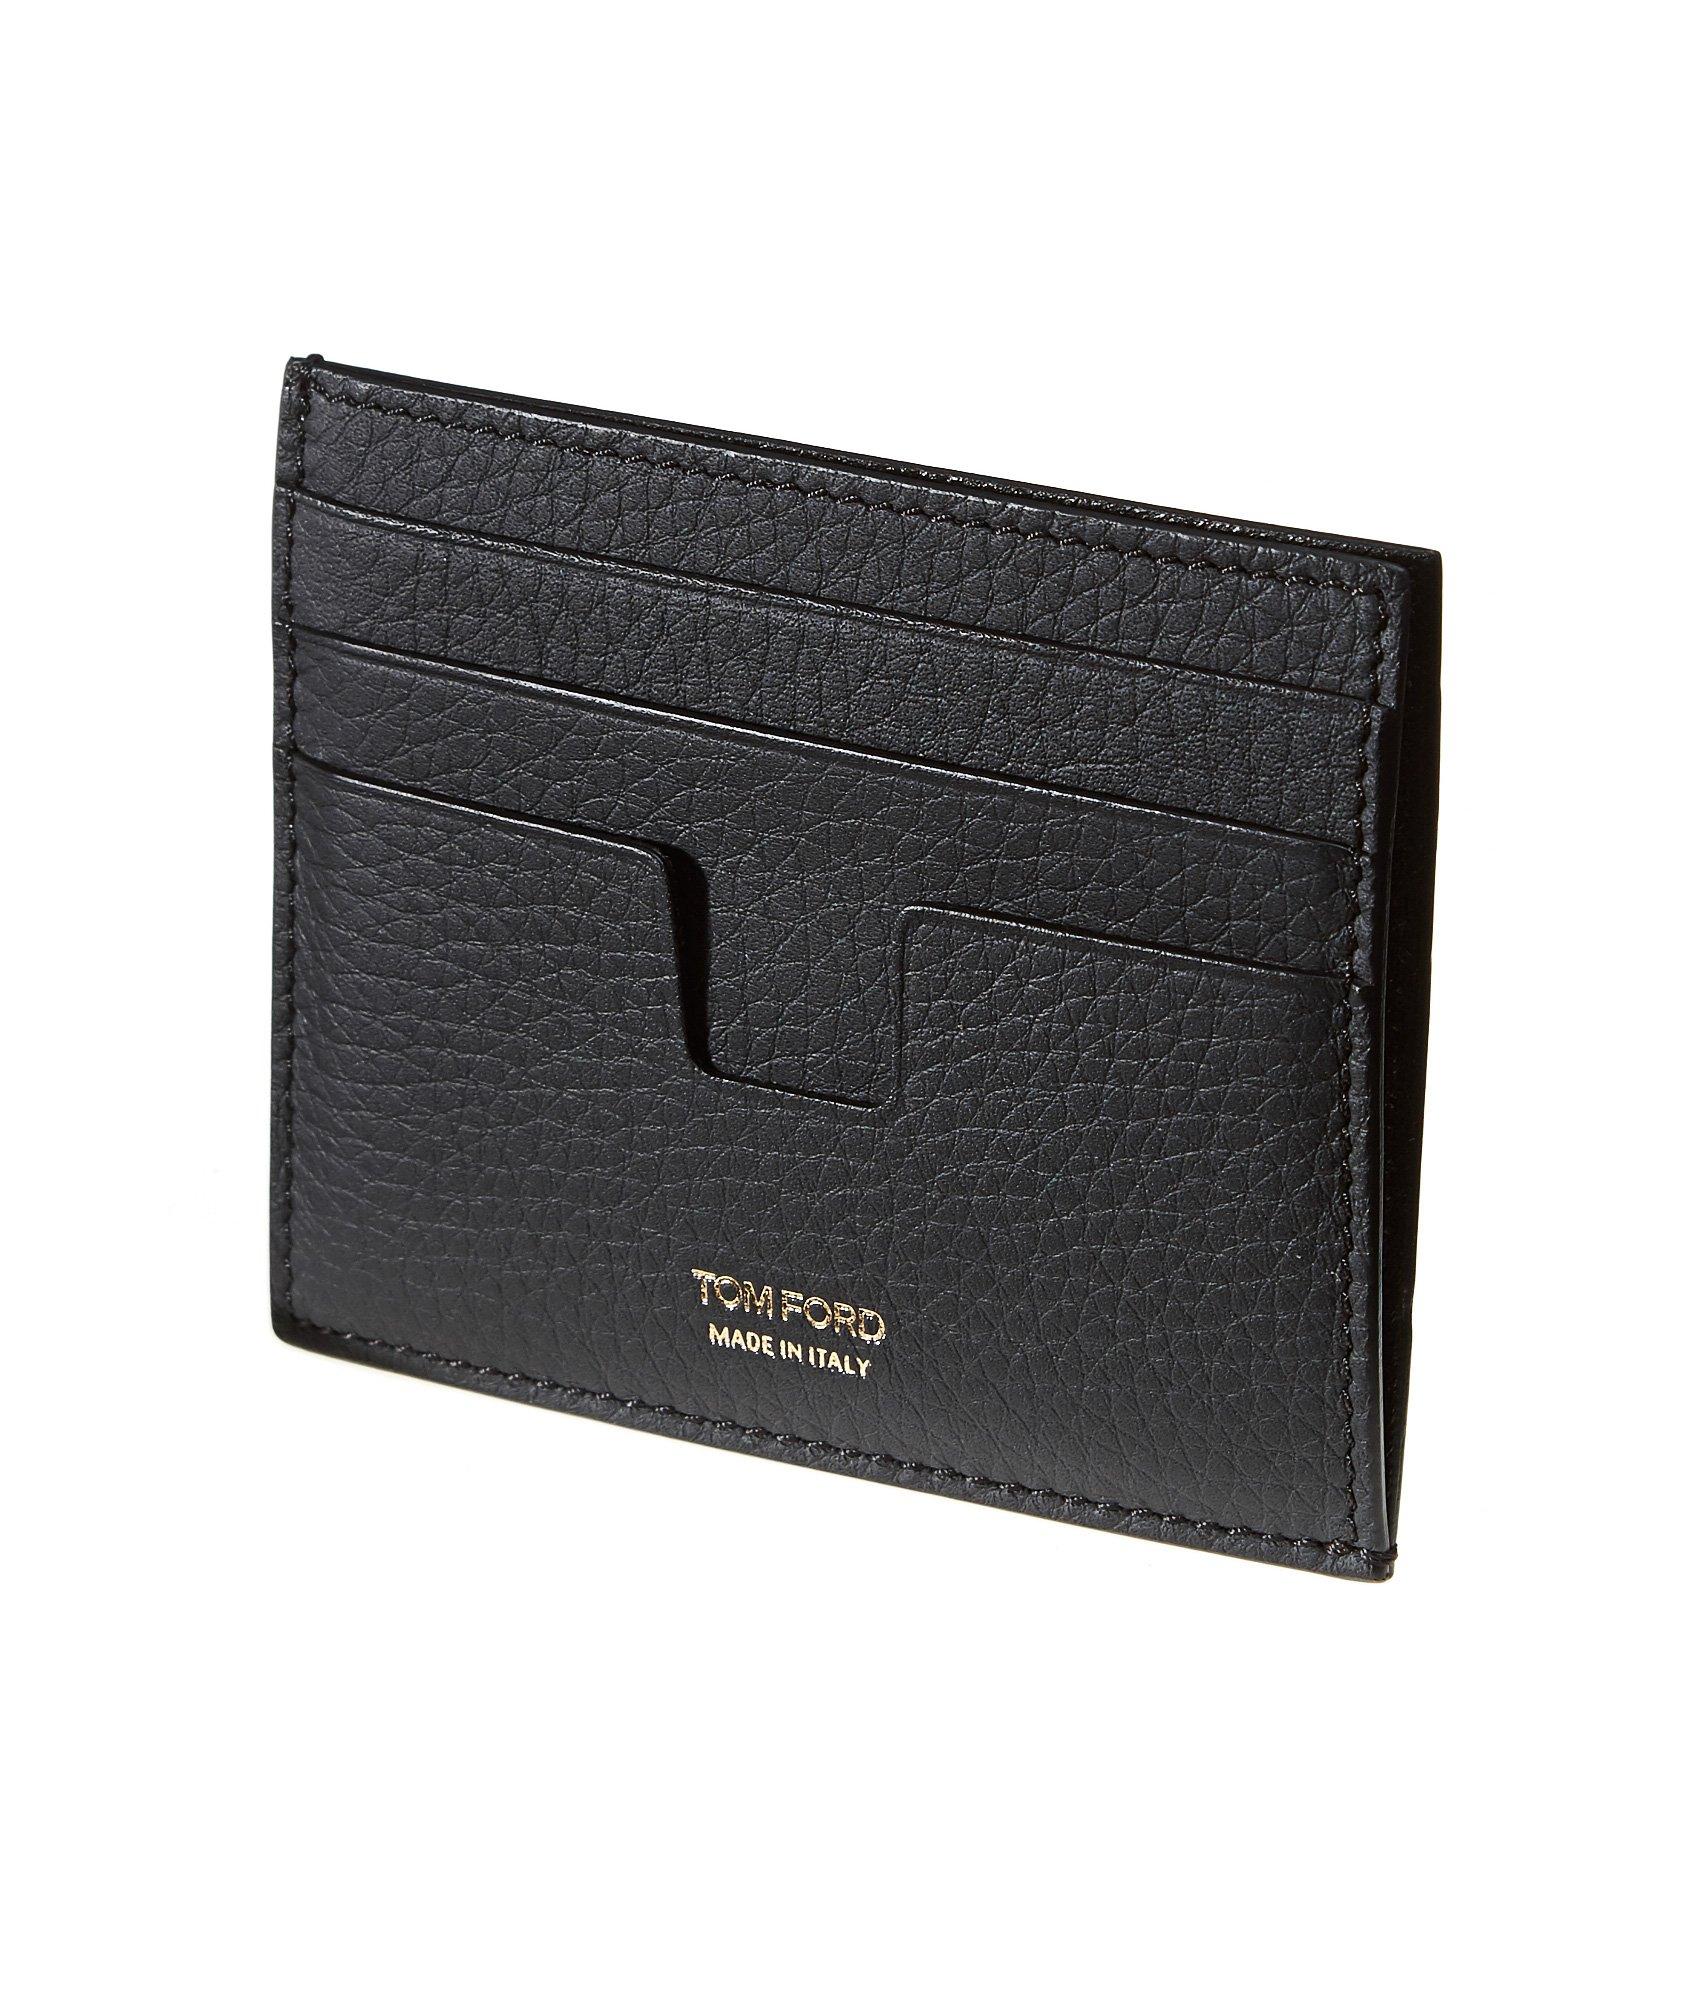 Grained Leather Cardholder image 0